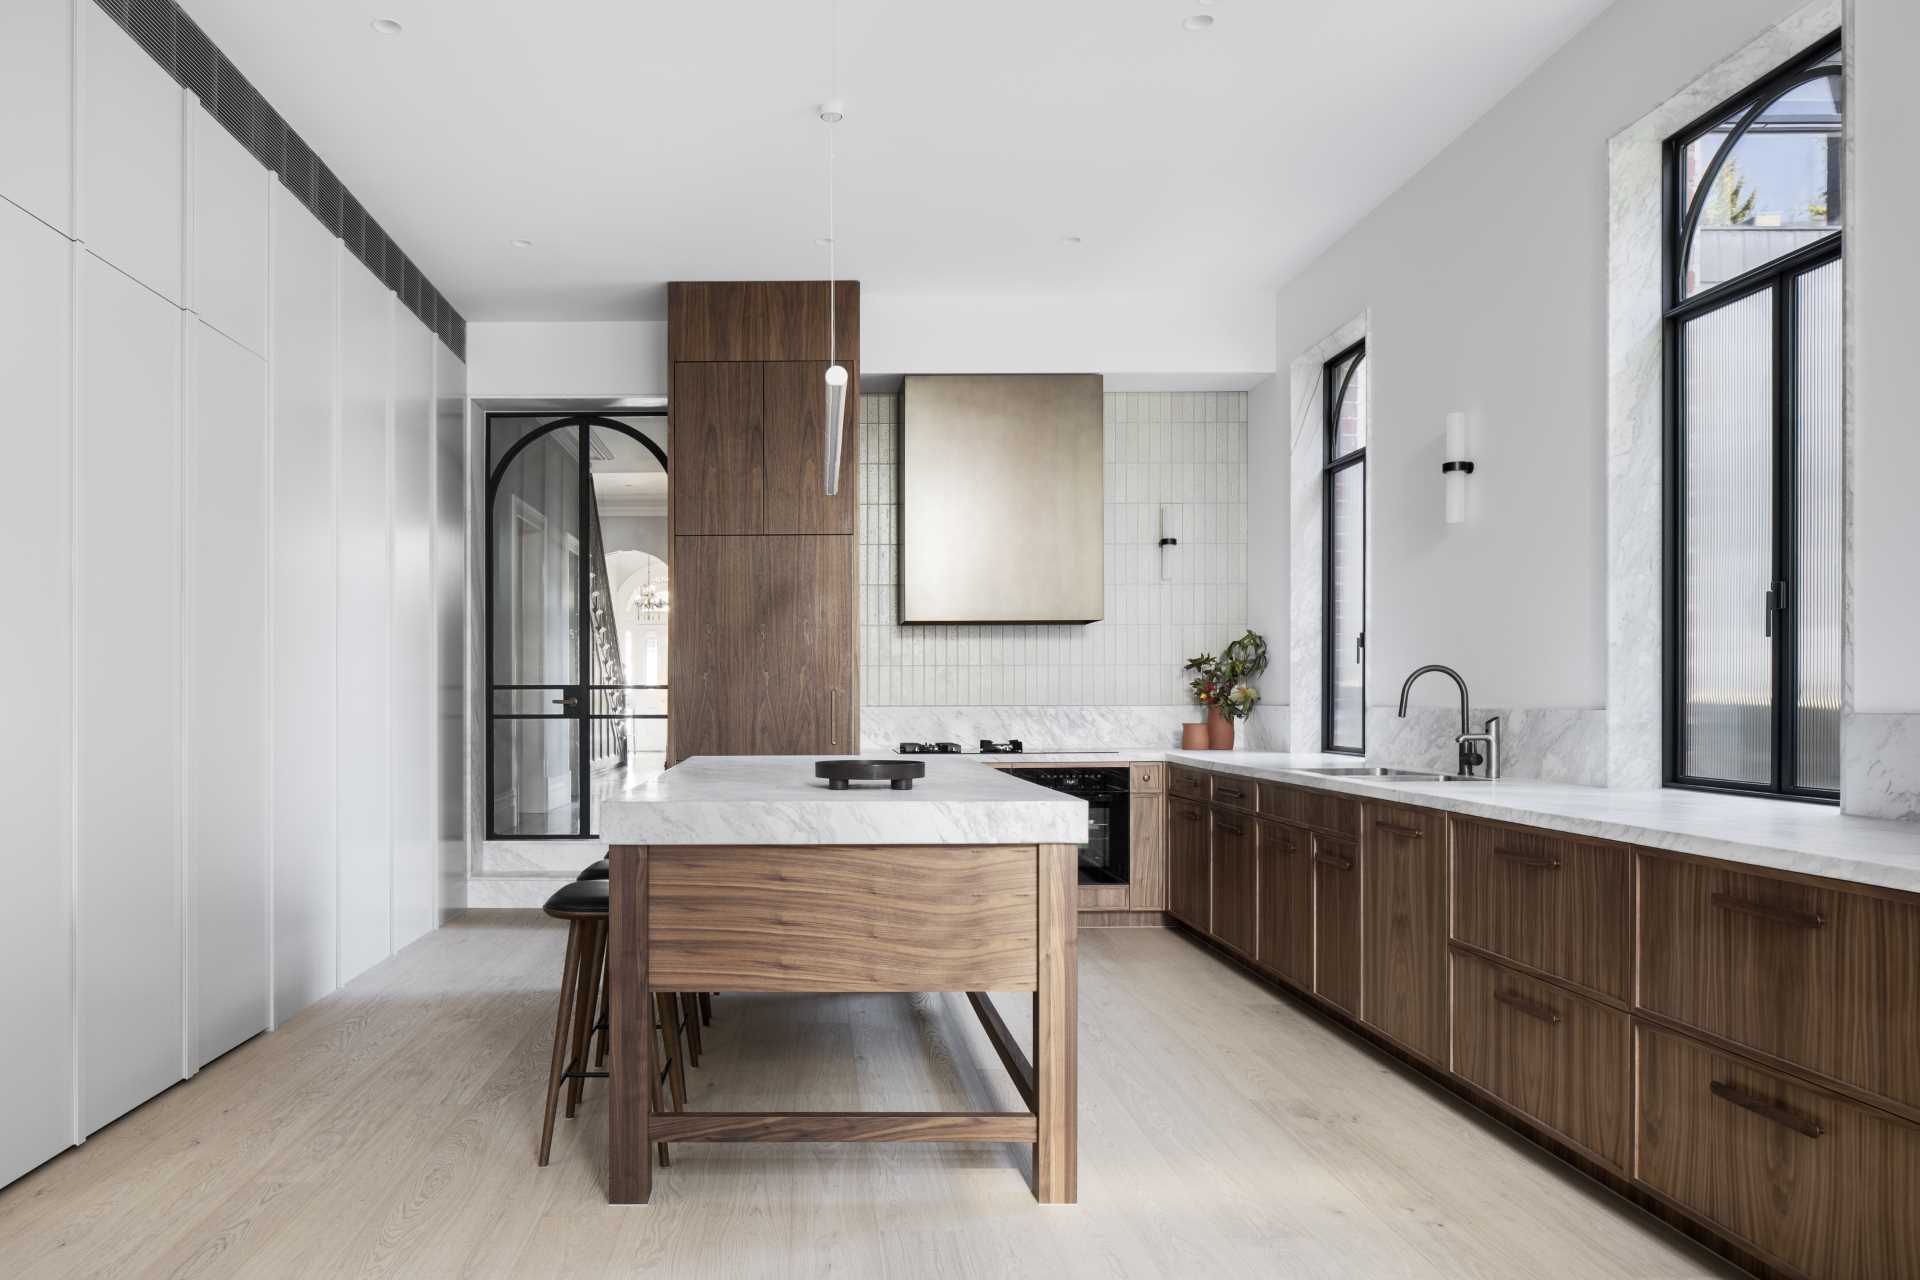 A modern kitchen with natural walnut veneer joinery and black steel-framed windows and doors.